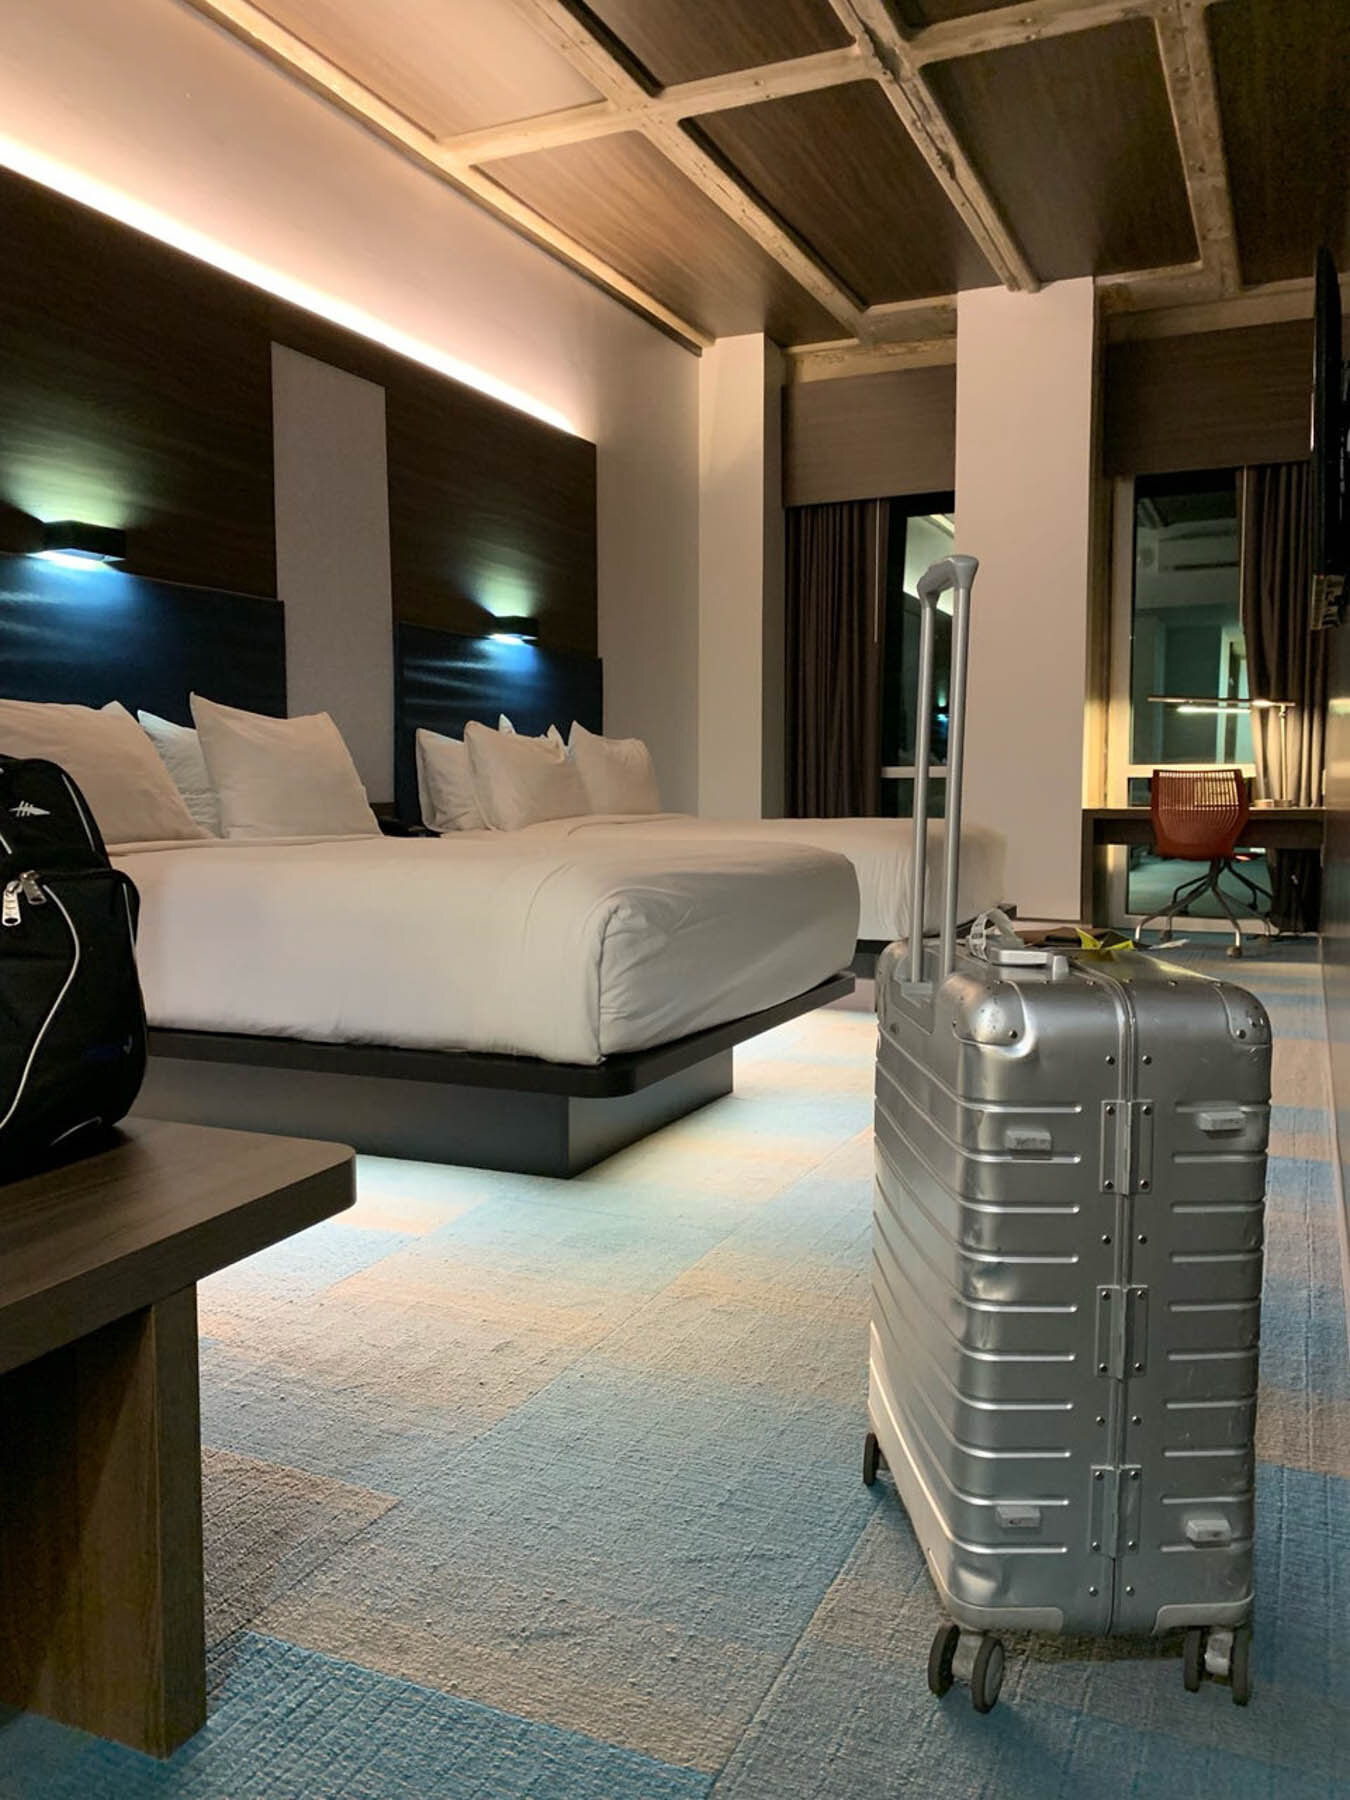 Guest room with a silver suitcase in the foreground